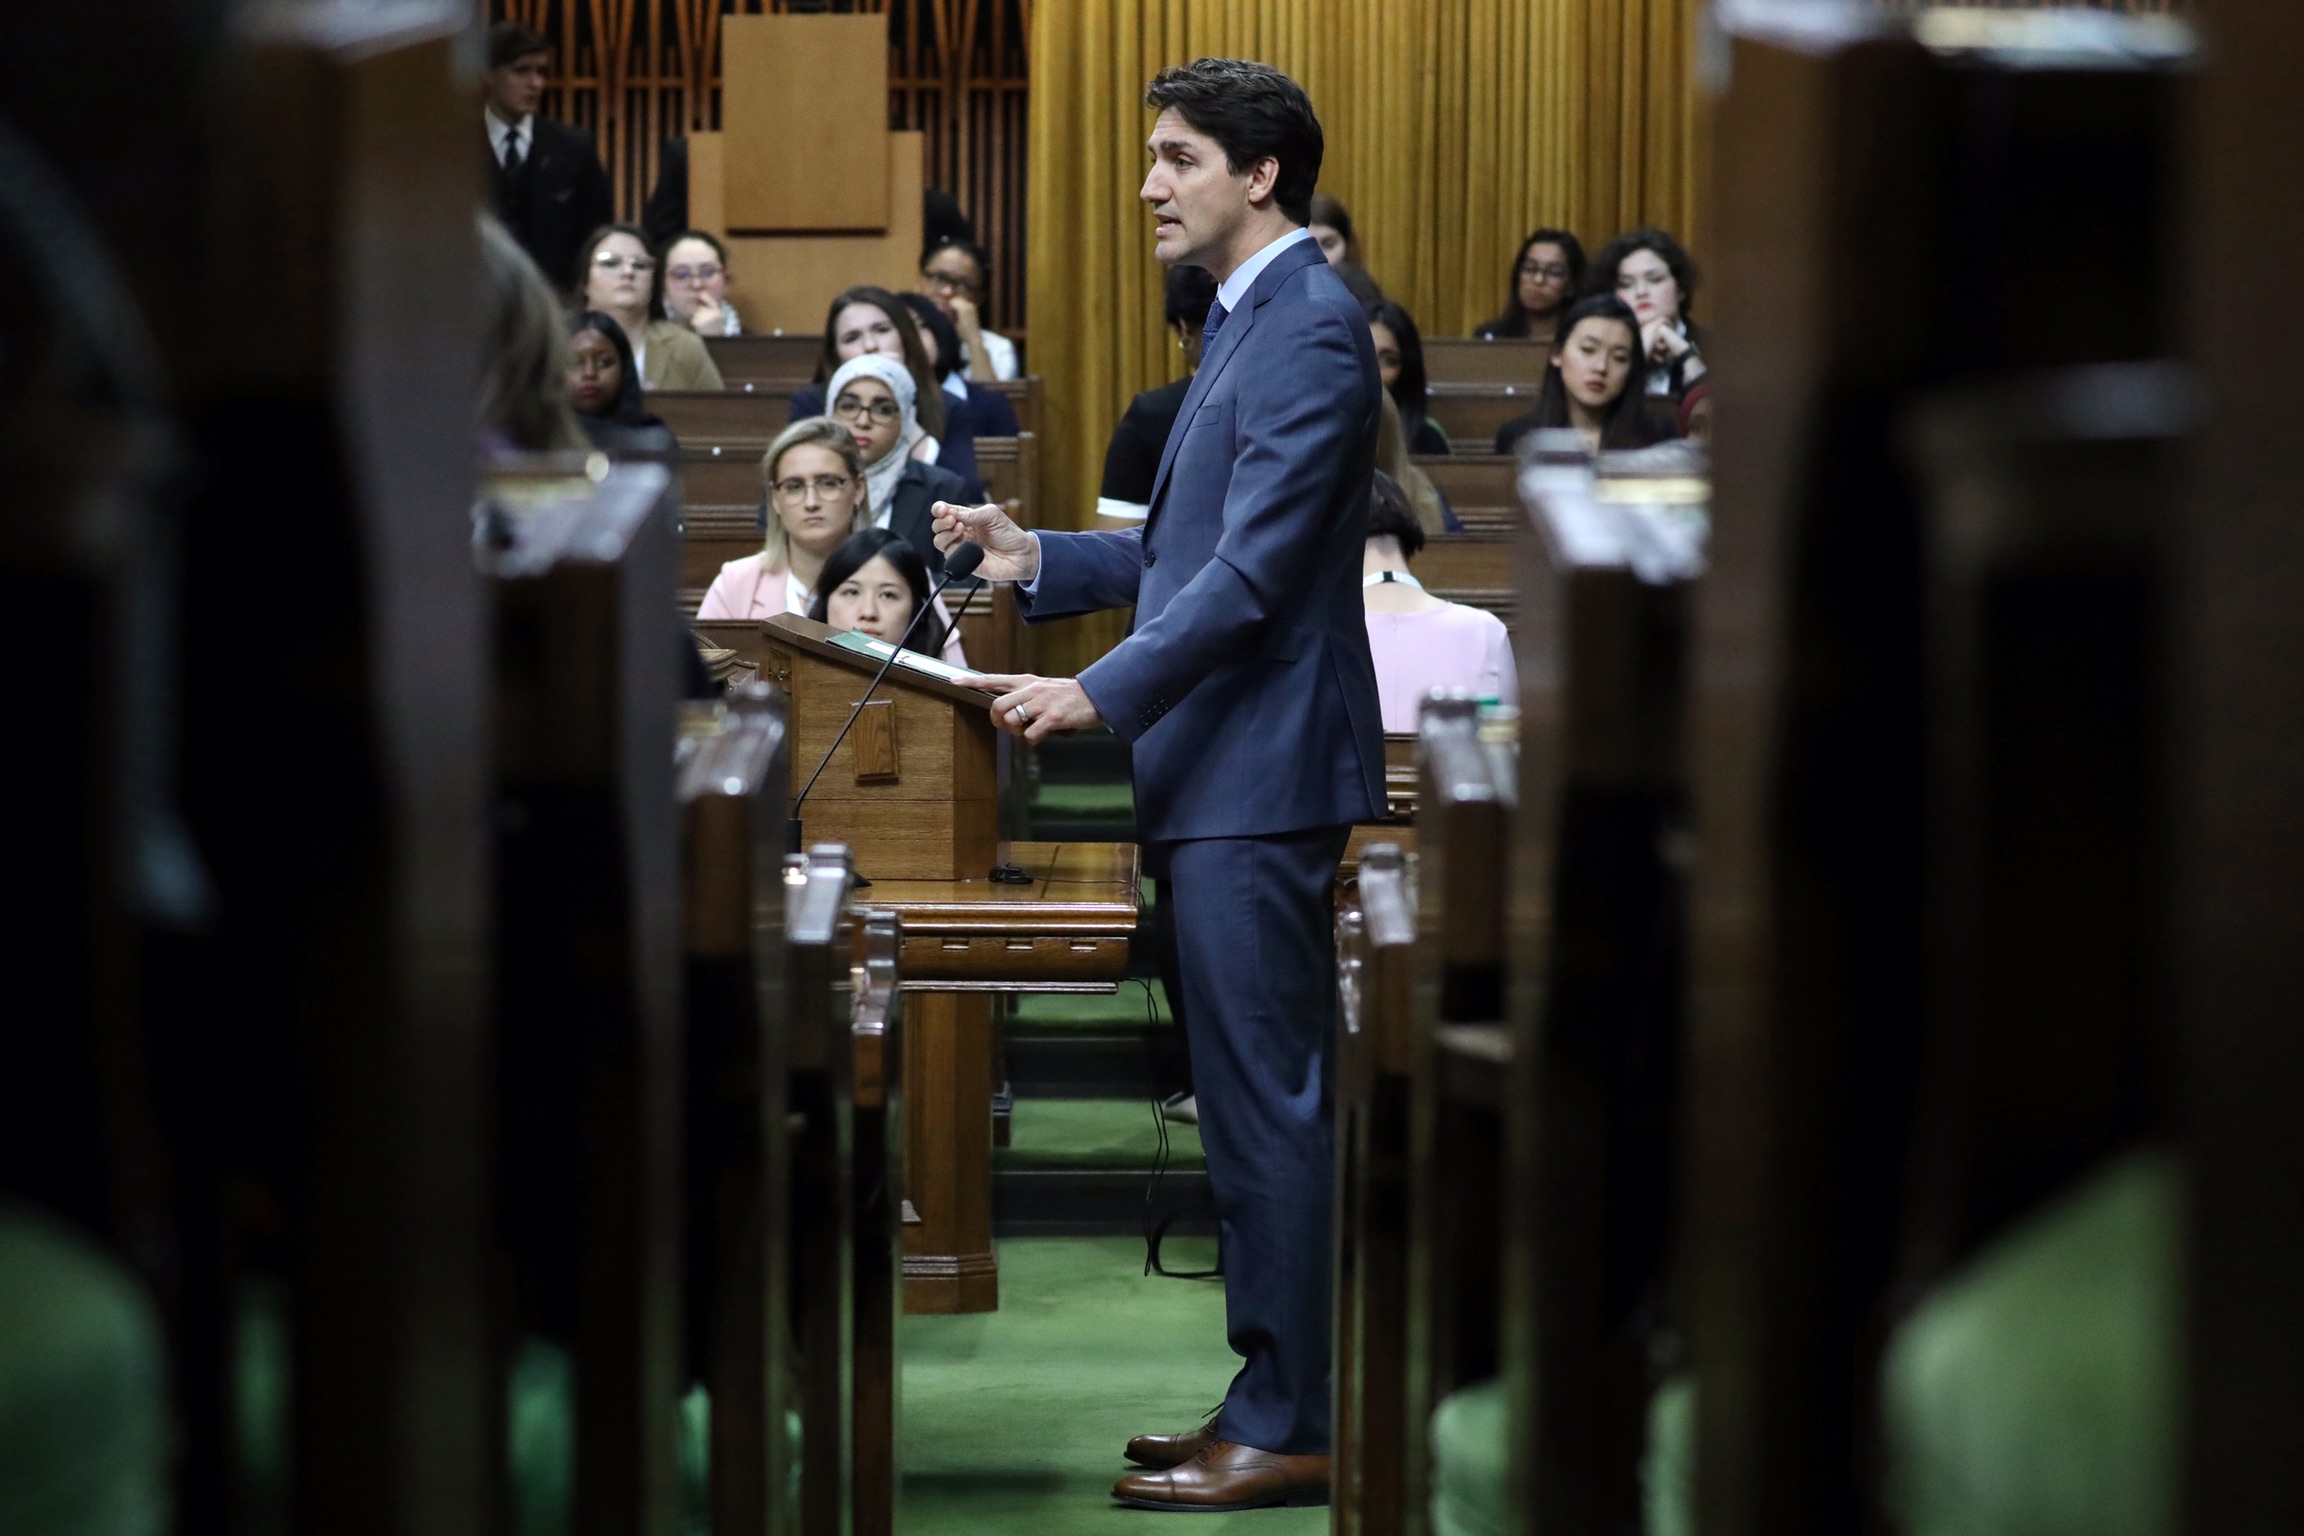 Canada's Prime Minister Justin Trudeau speaks during the Daughters of the Vote event in the House of Commons on Parliament Hill in Ottawa, Ontario, Canada, April 3, 2019. REUTERS/Chris Wattie 